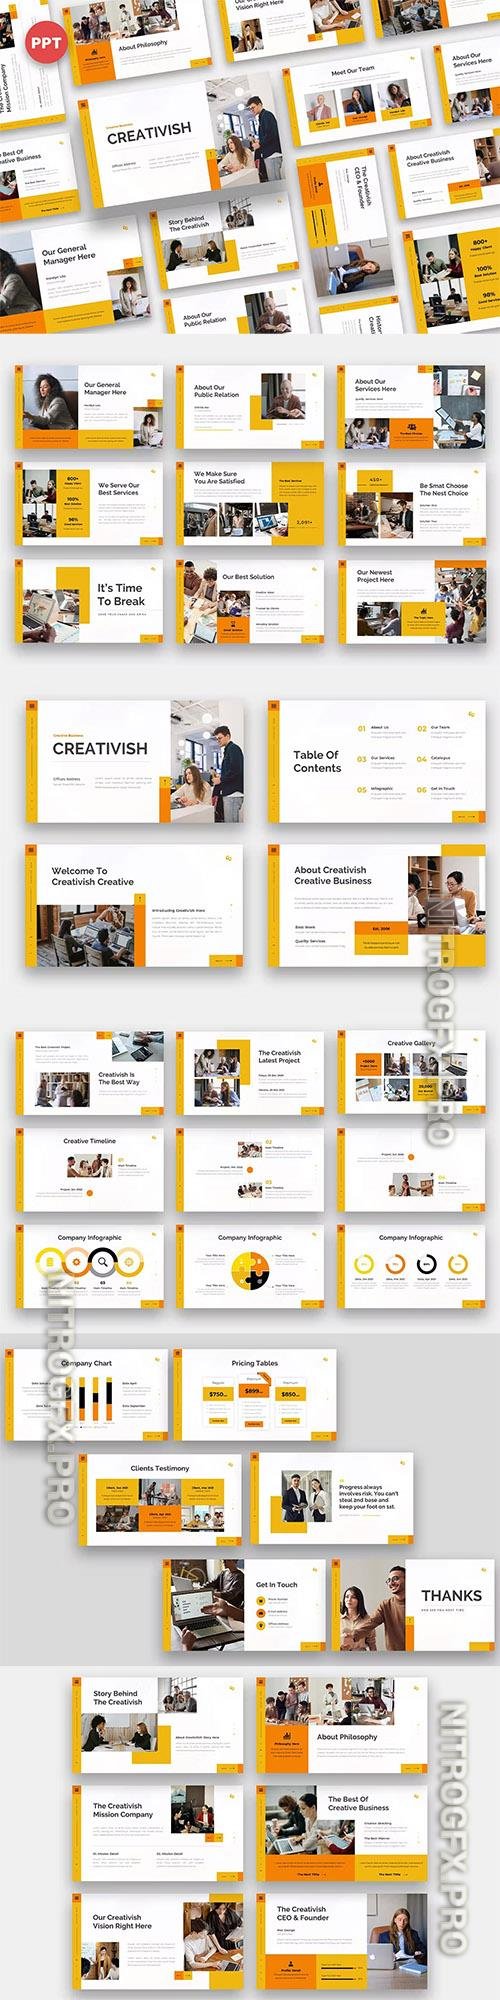 Creativish - Creative Business Powerpoint and Keynote Templates